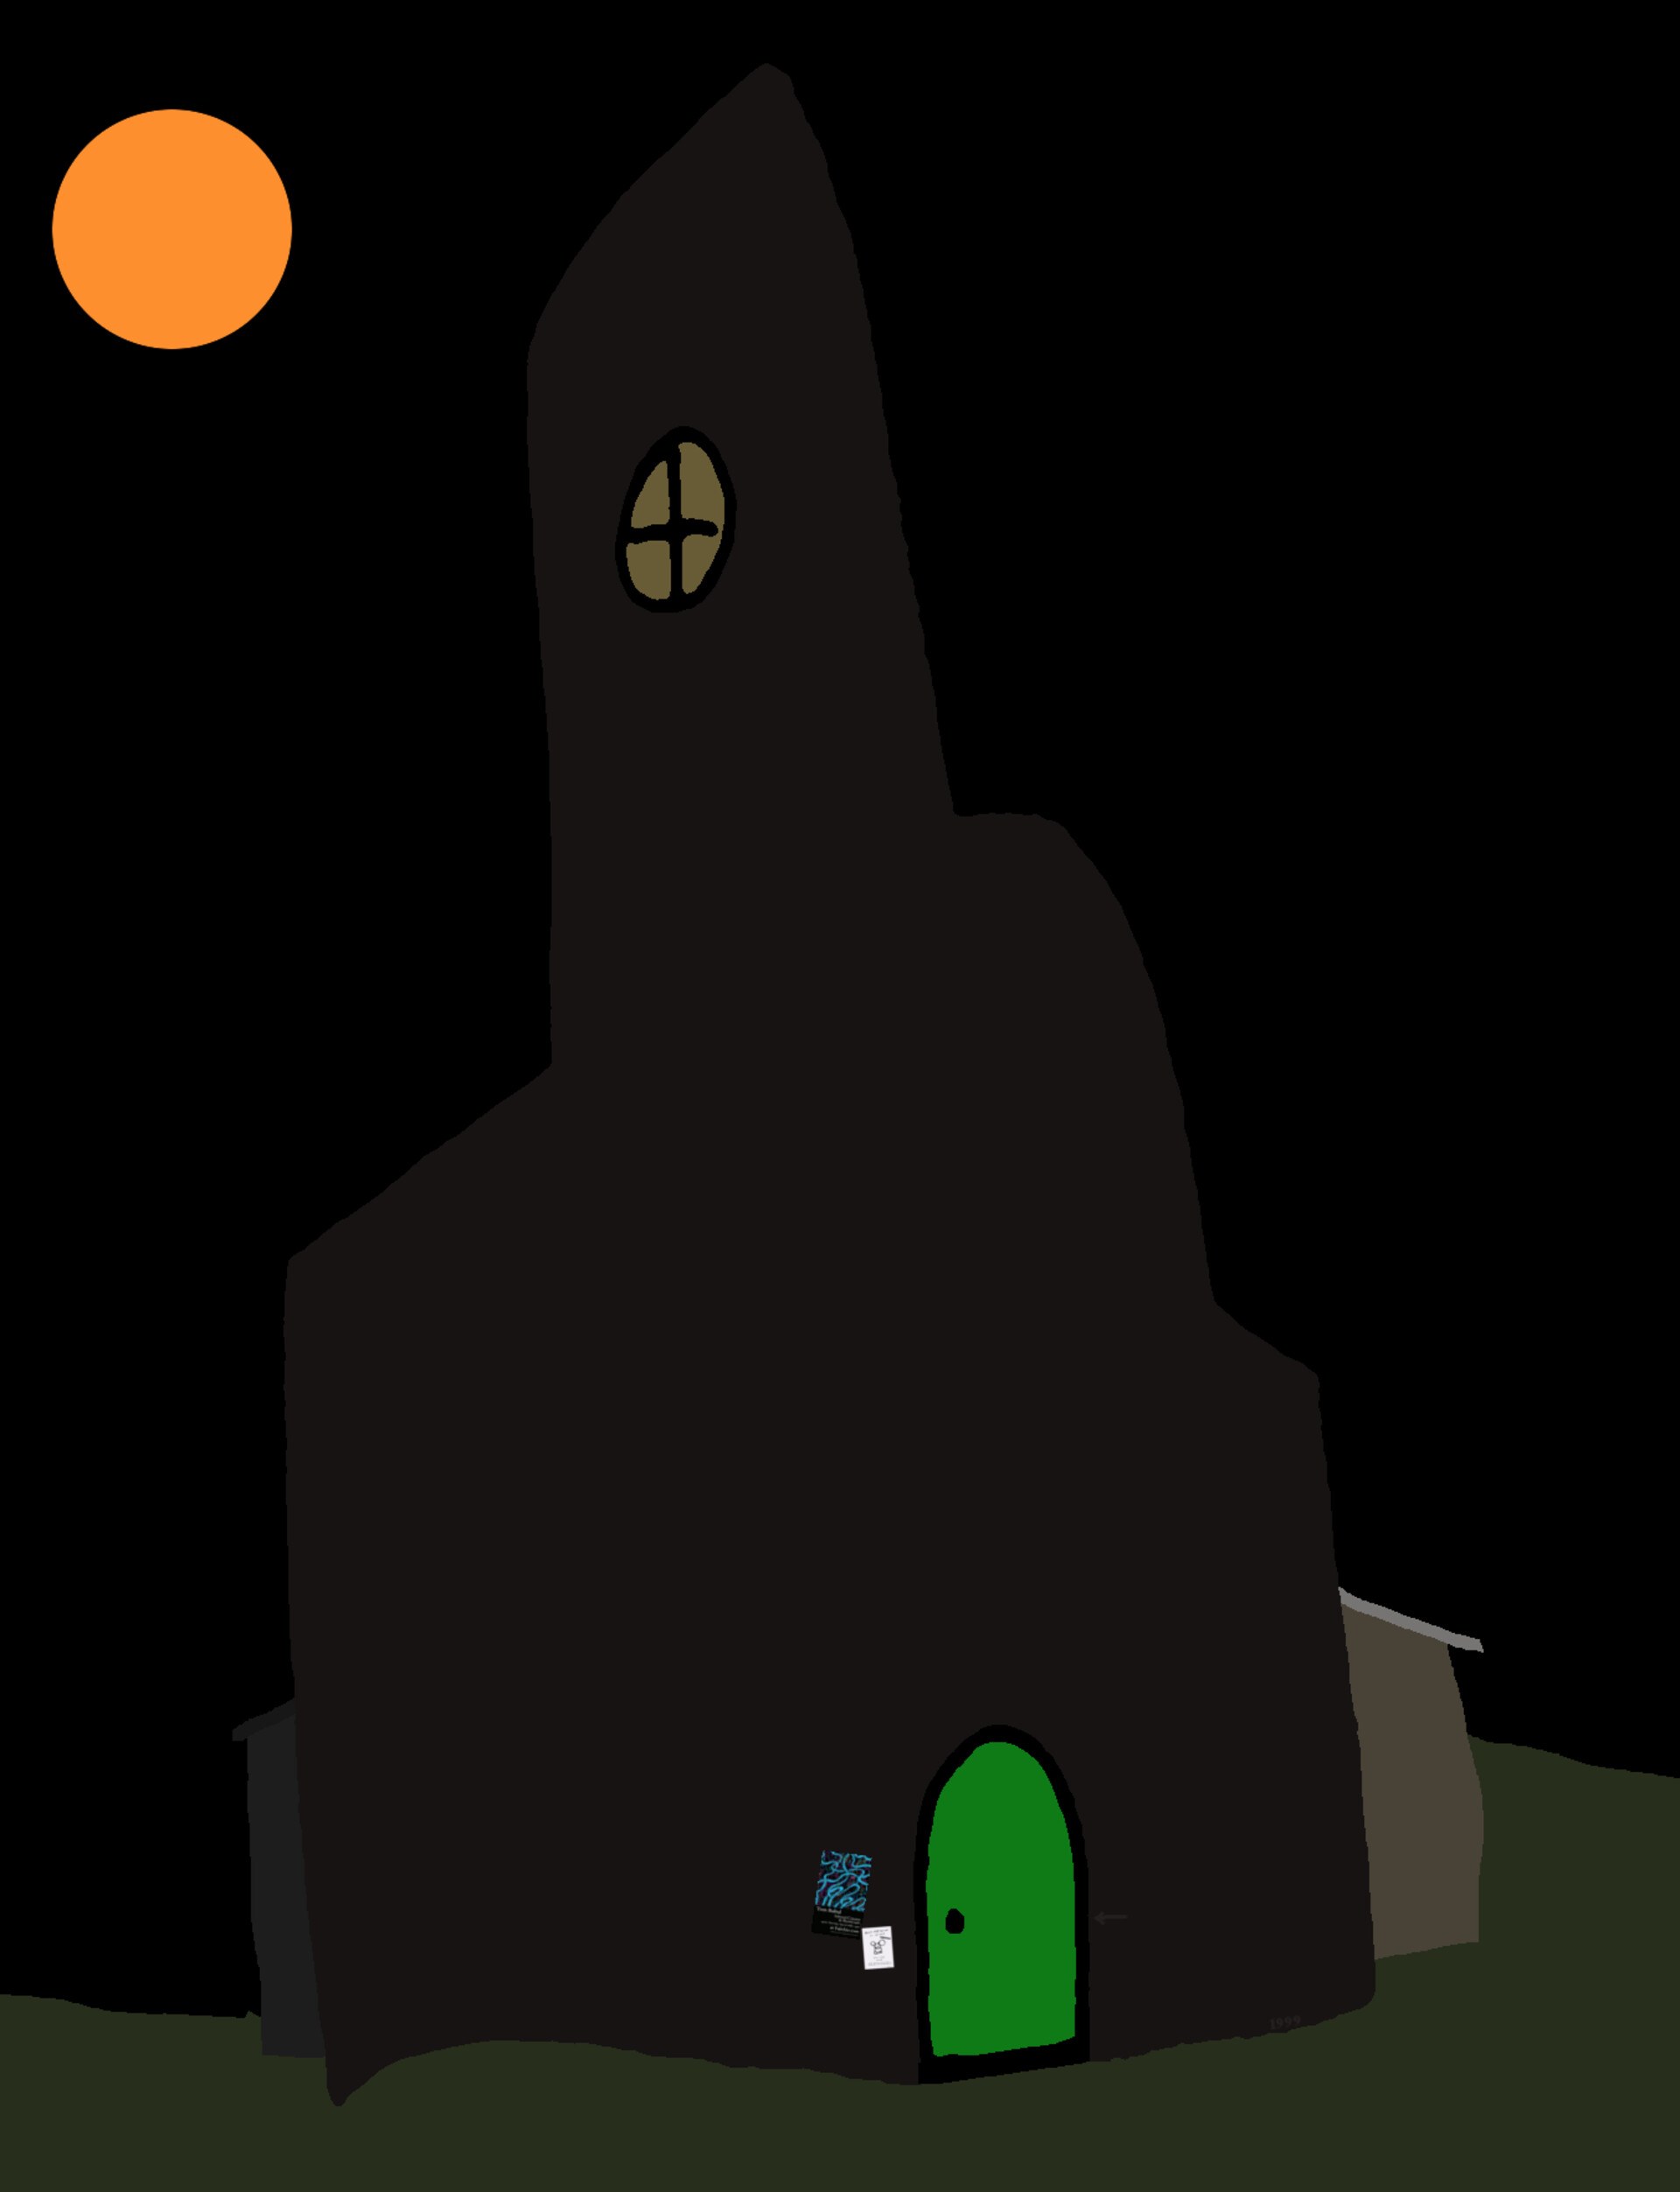 The eponymous "spooky castle": an MS Paint style picture of a dark lump of a castle with a little green door at the bottom